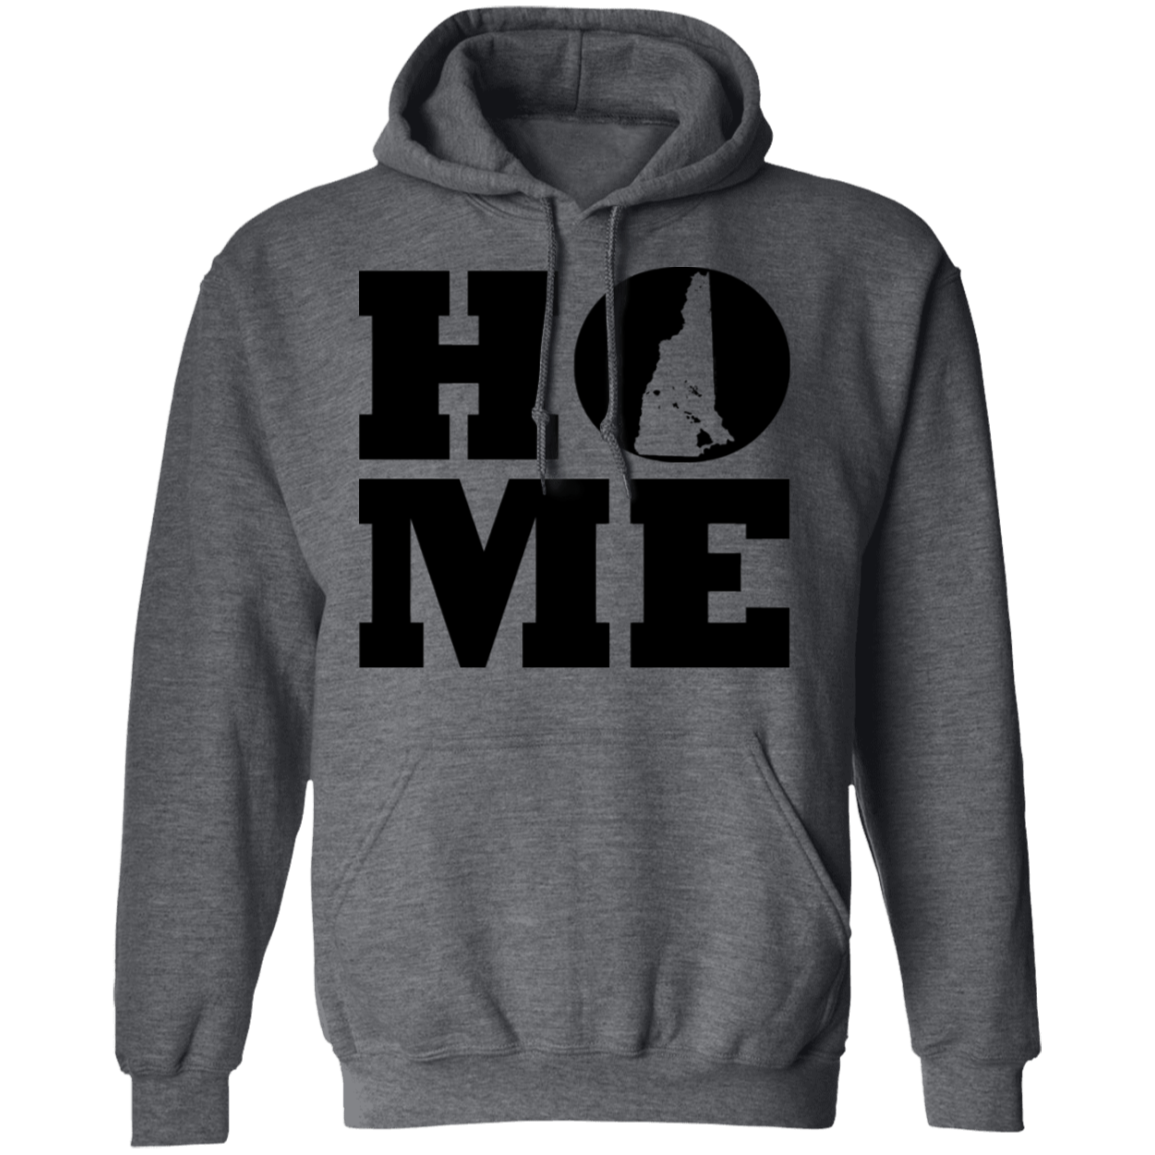 Home Roots Hawai'i and New Hampshire Pullover Hoodie